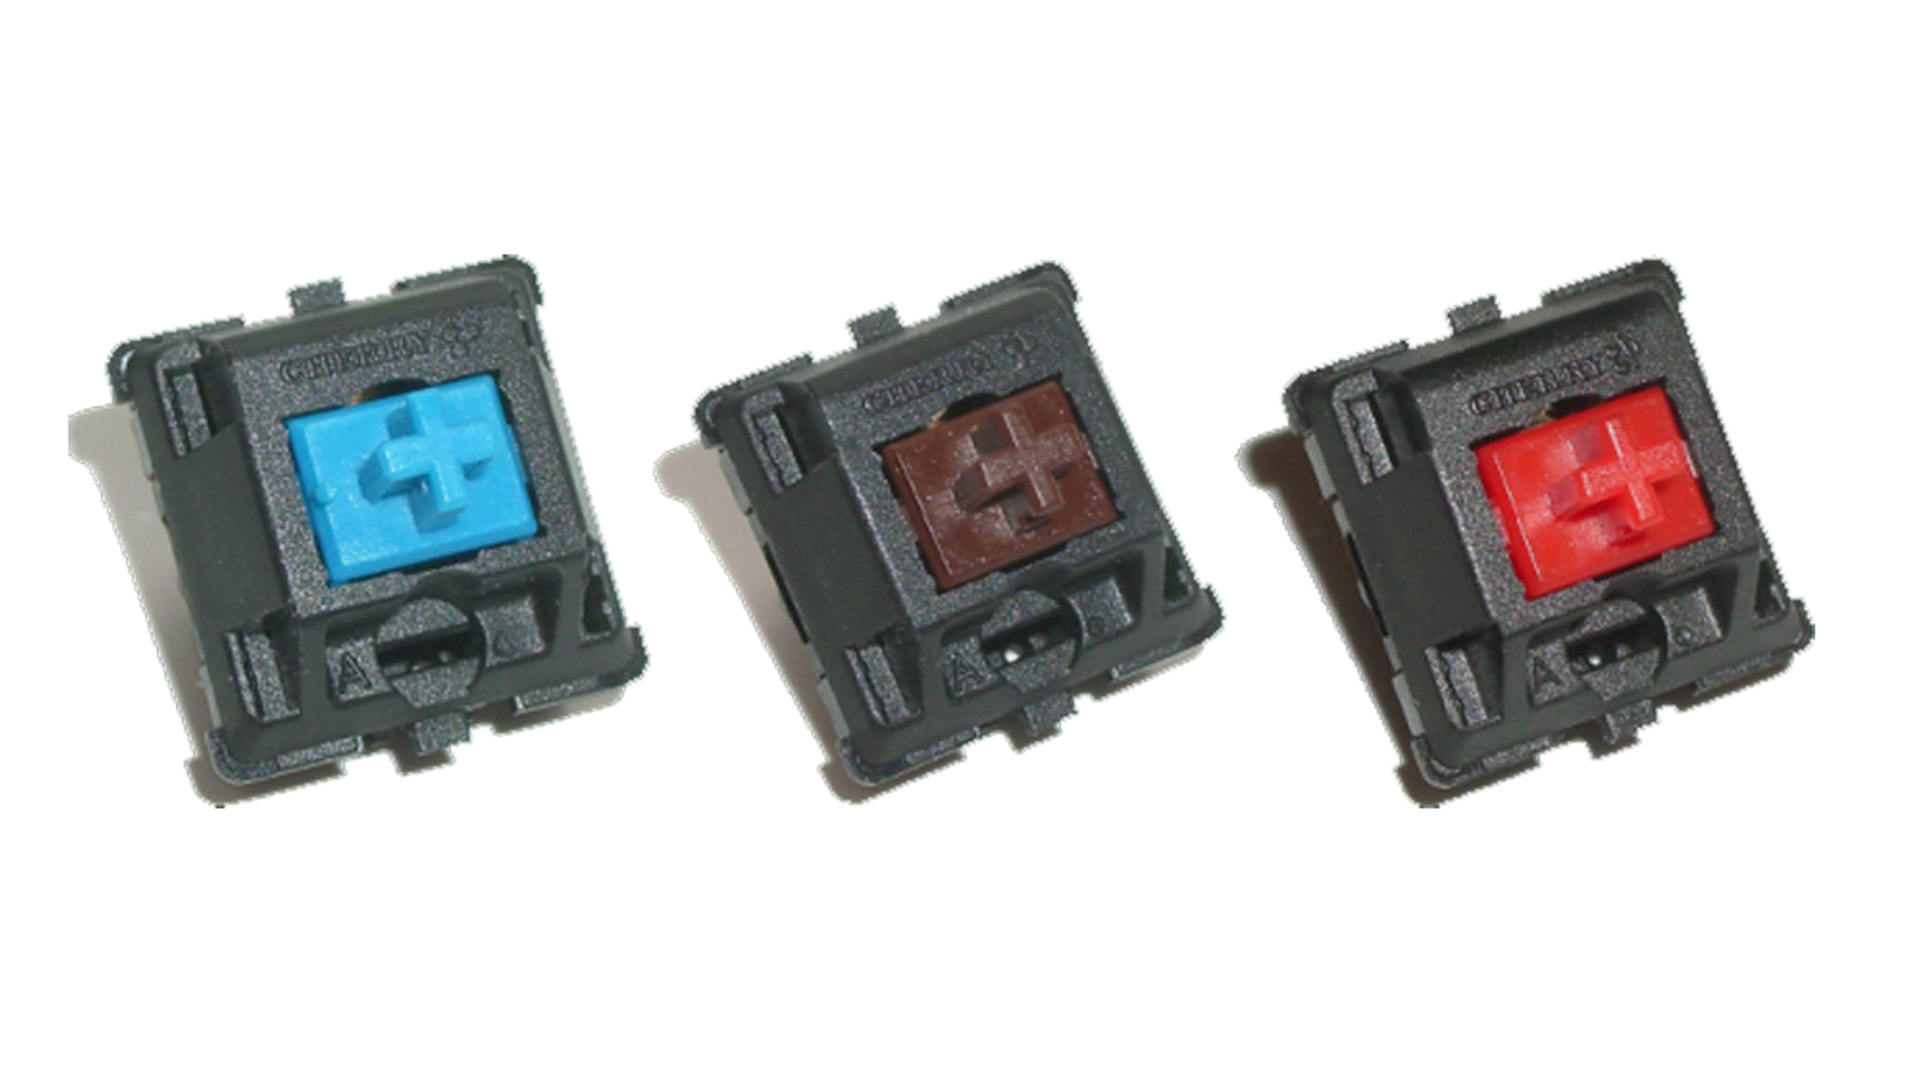 Three different keyboard switches (blue, brown, and red) from Cherry